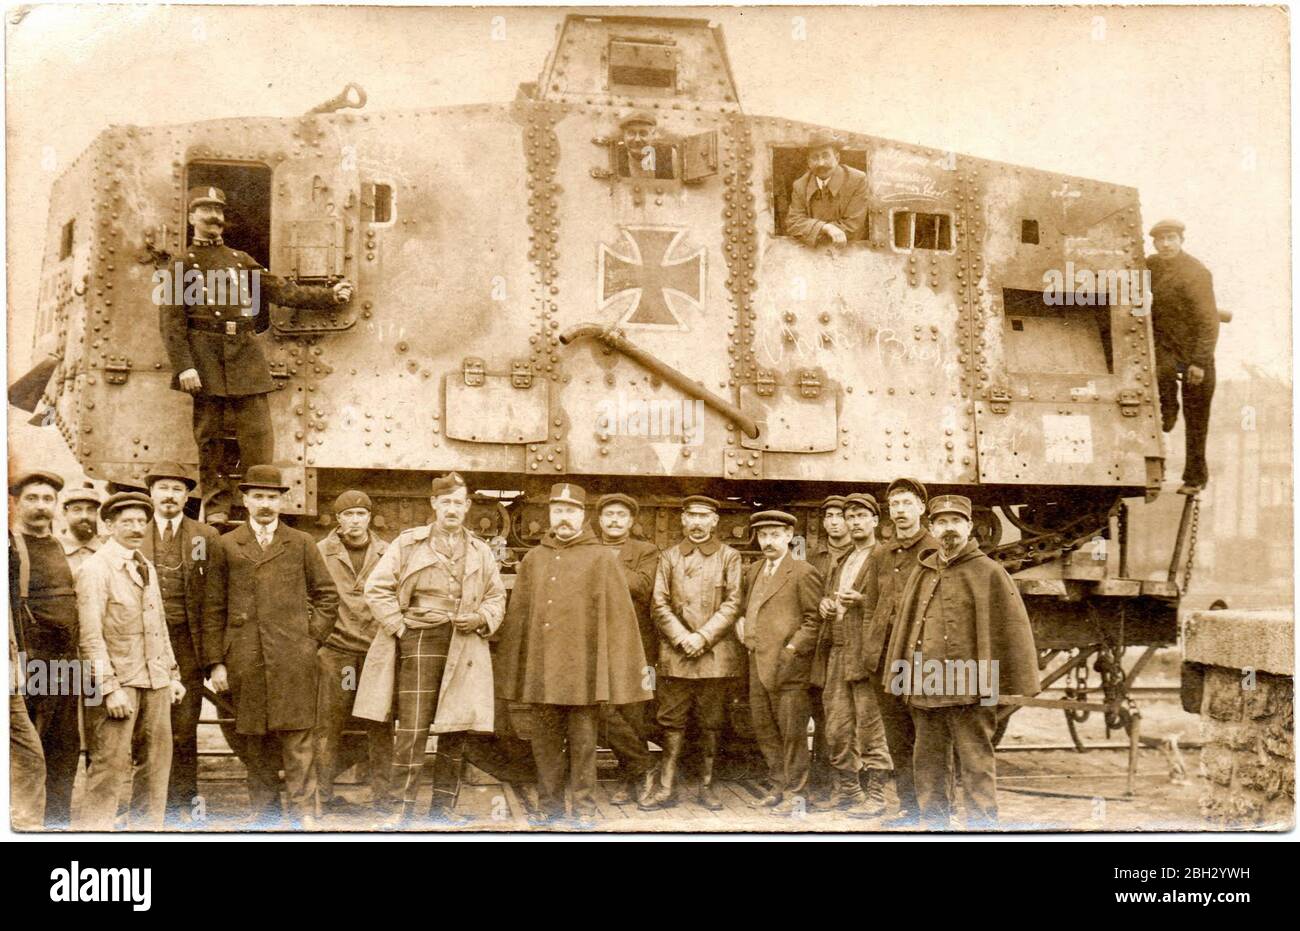 he A7V was a heavy tank introduced by Germany in 1918 during World War I. The A7V was 7.34 m (24 ft 1 in) long and 3 m (9 ft 10 in) wide, and the maximum height was 3.3 m (10 ft 10 in). The crew officially consisted of at least 17 soldiers and one officer: commander (officer, typically a lieutenant), driver, mechanic, mechanic/signaller, 12 infantrymen (six machine gunners, six loaders), and two artillerymen (main gunner and loader). A7Vs often went into action with as many as 25 men on board Stock Photo